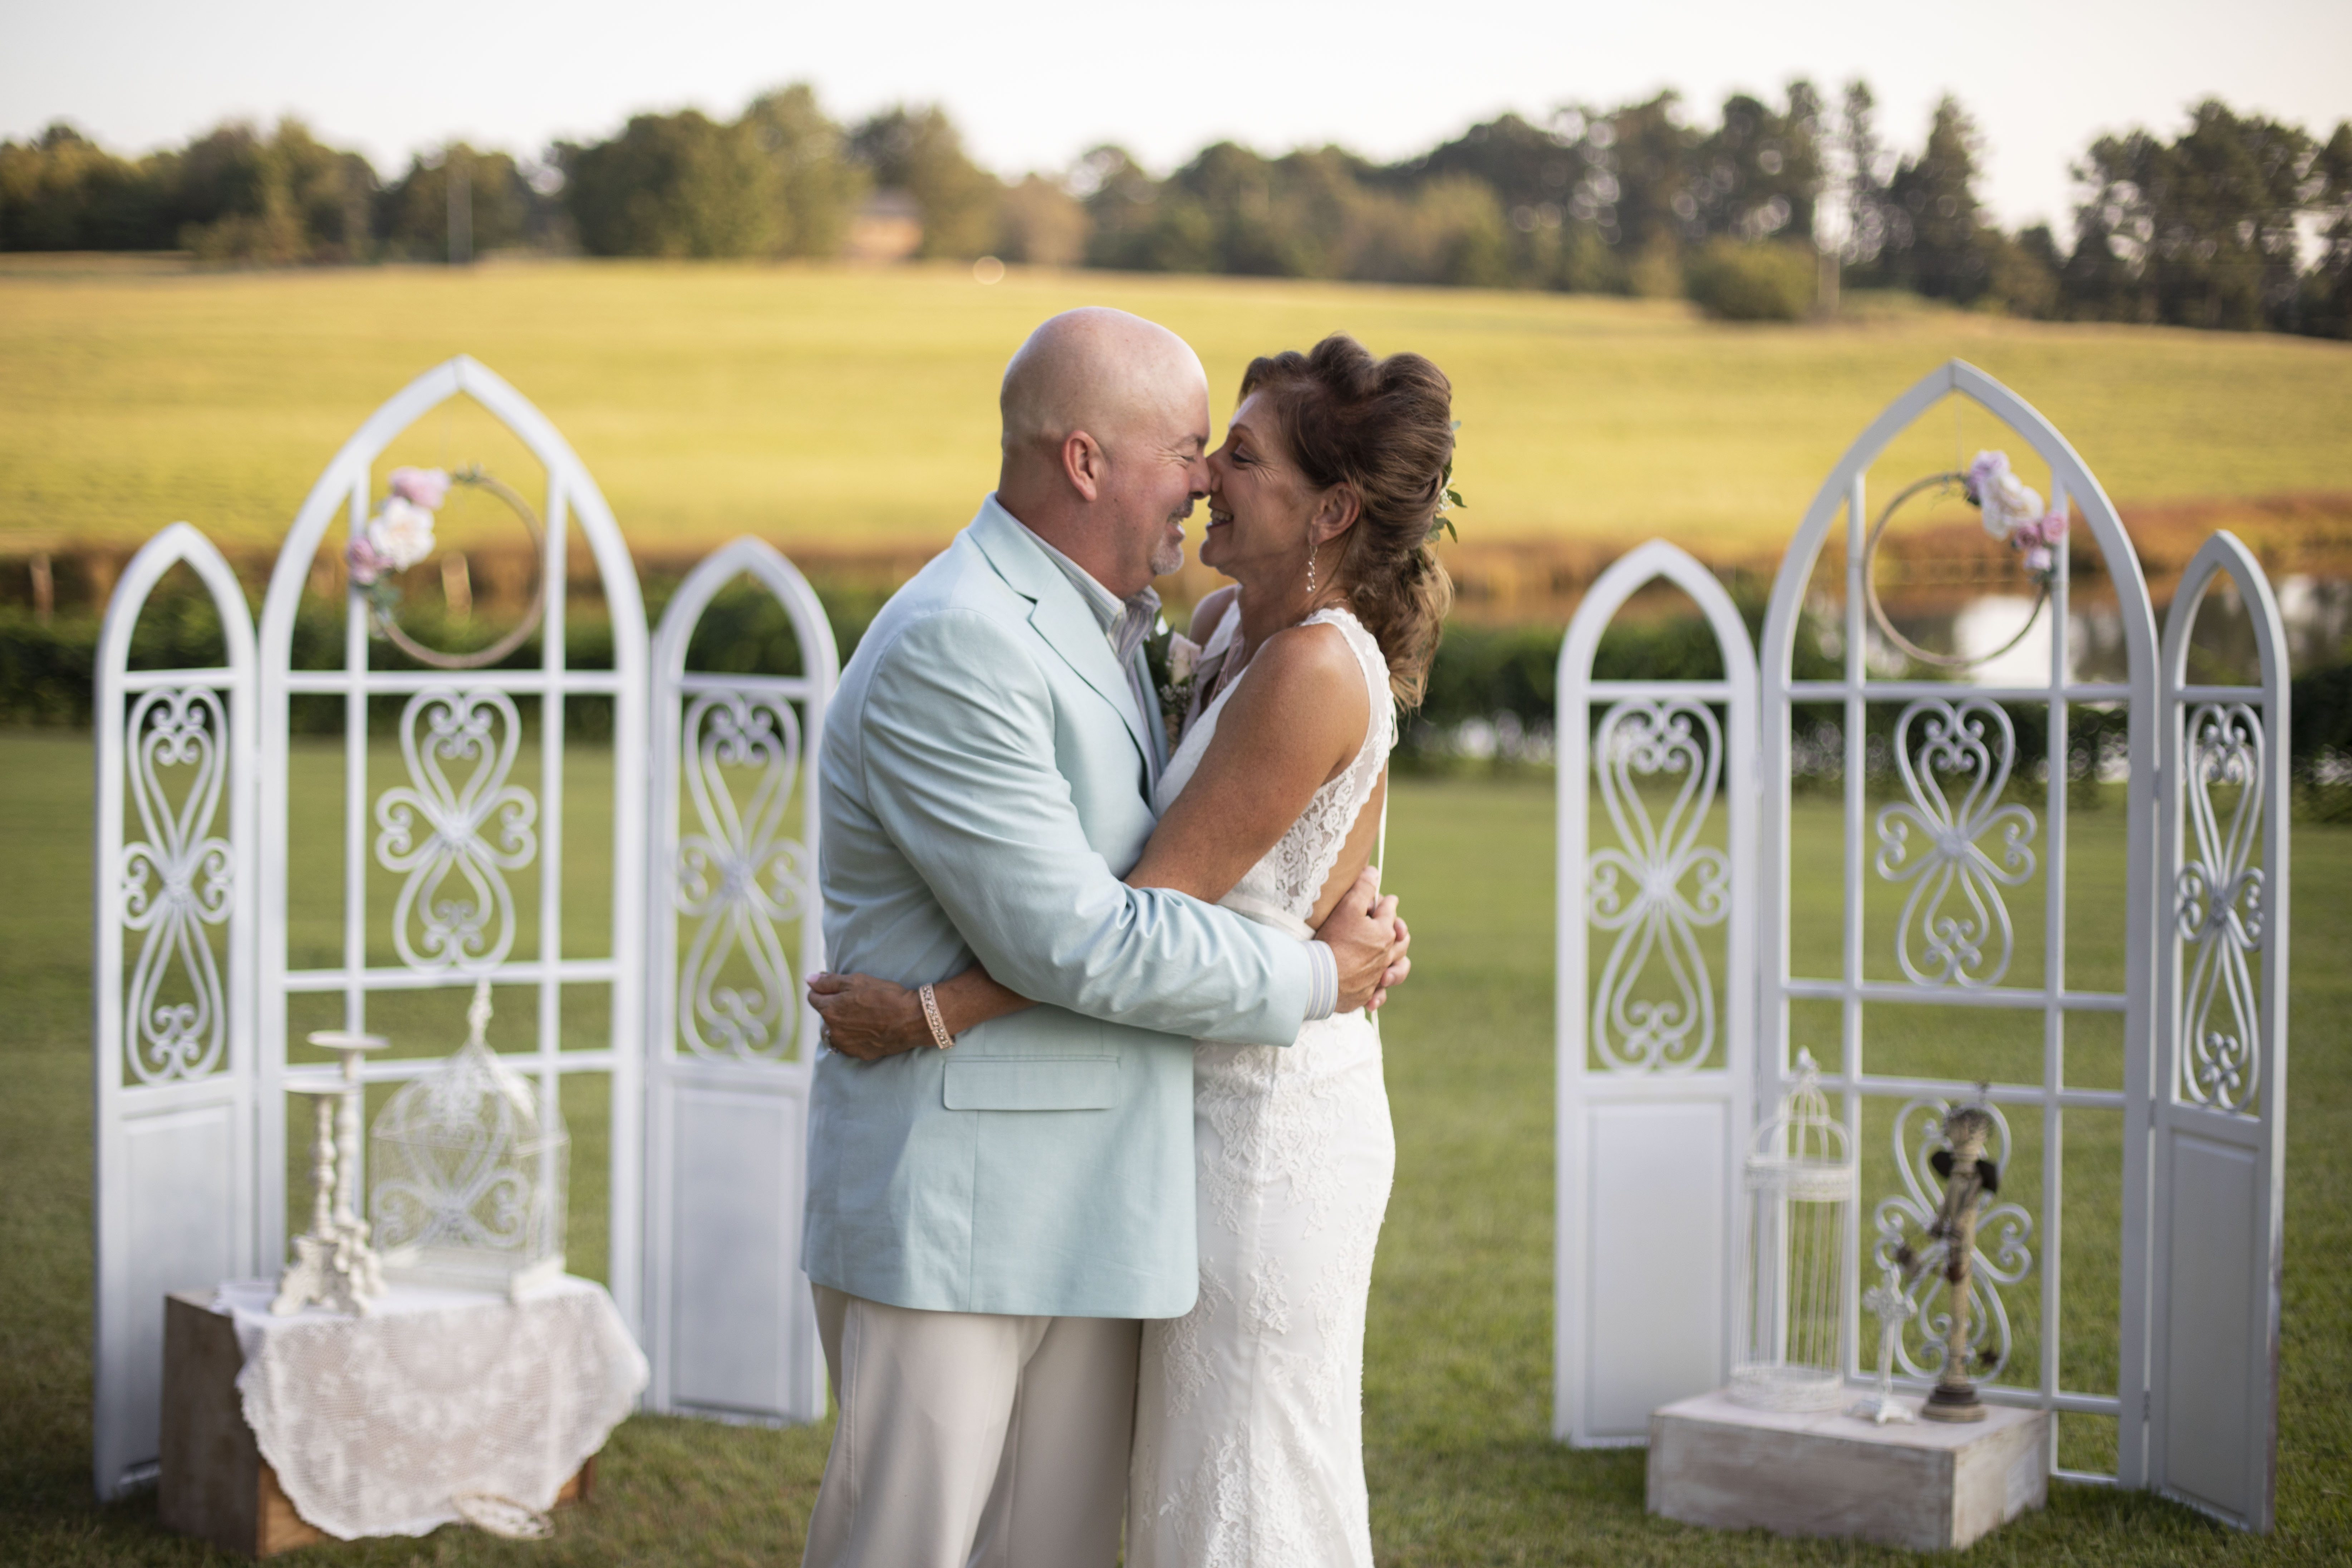 Romantic Vintage Wedding at Summit Chase Country Club in Snellville GA